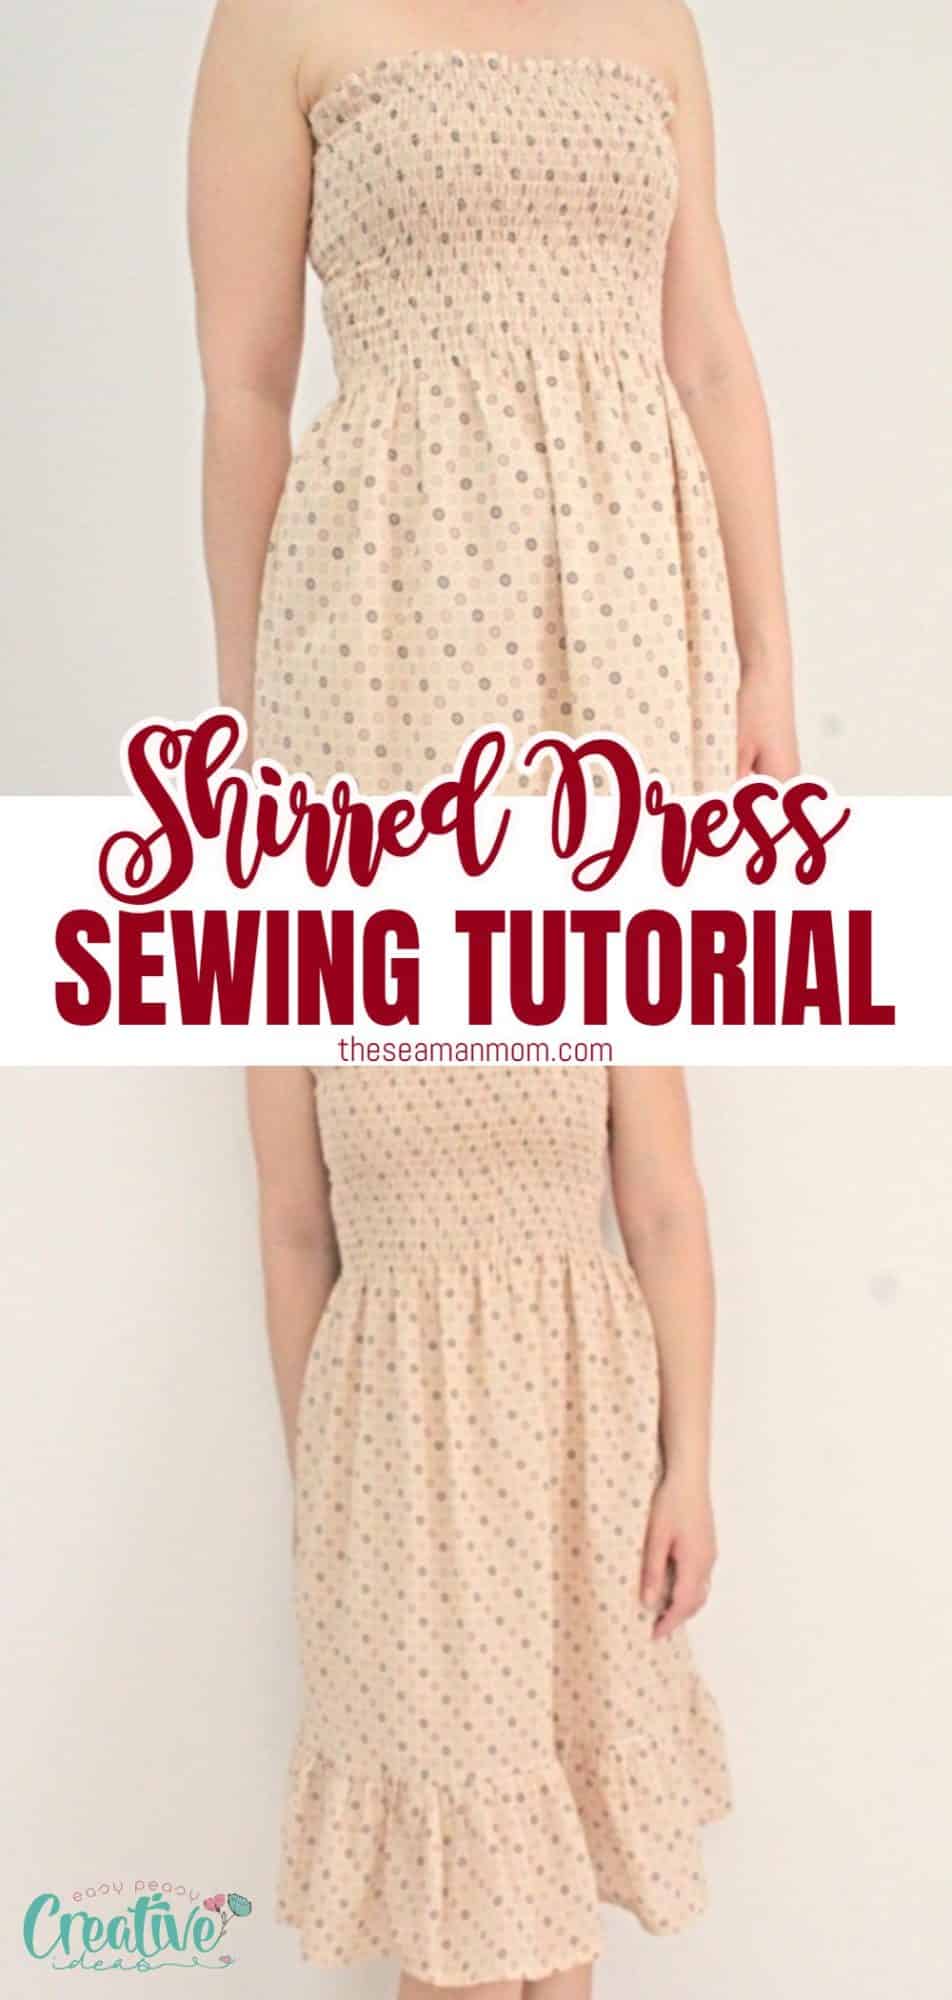 How to sew a shirred dress